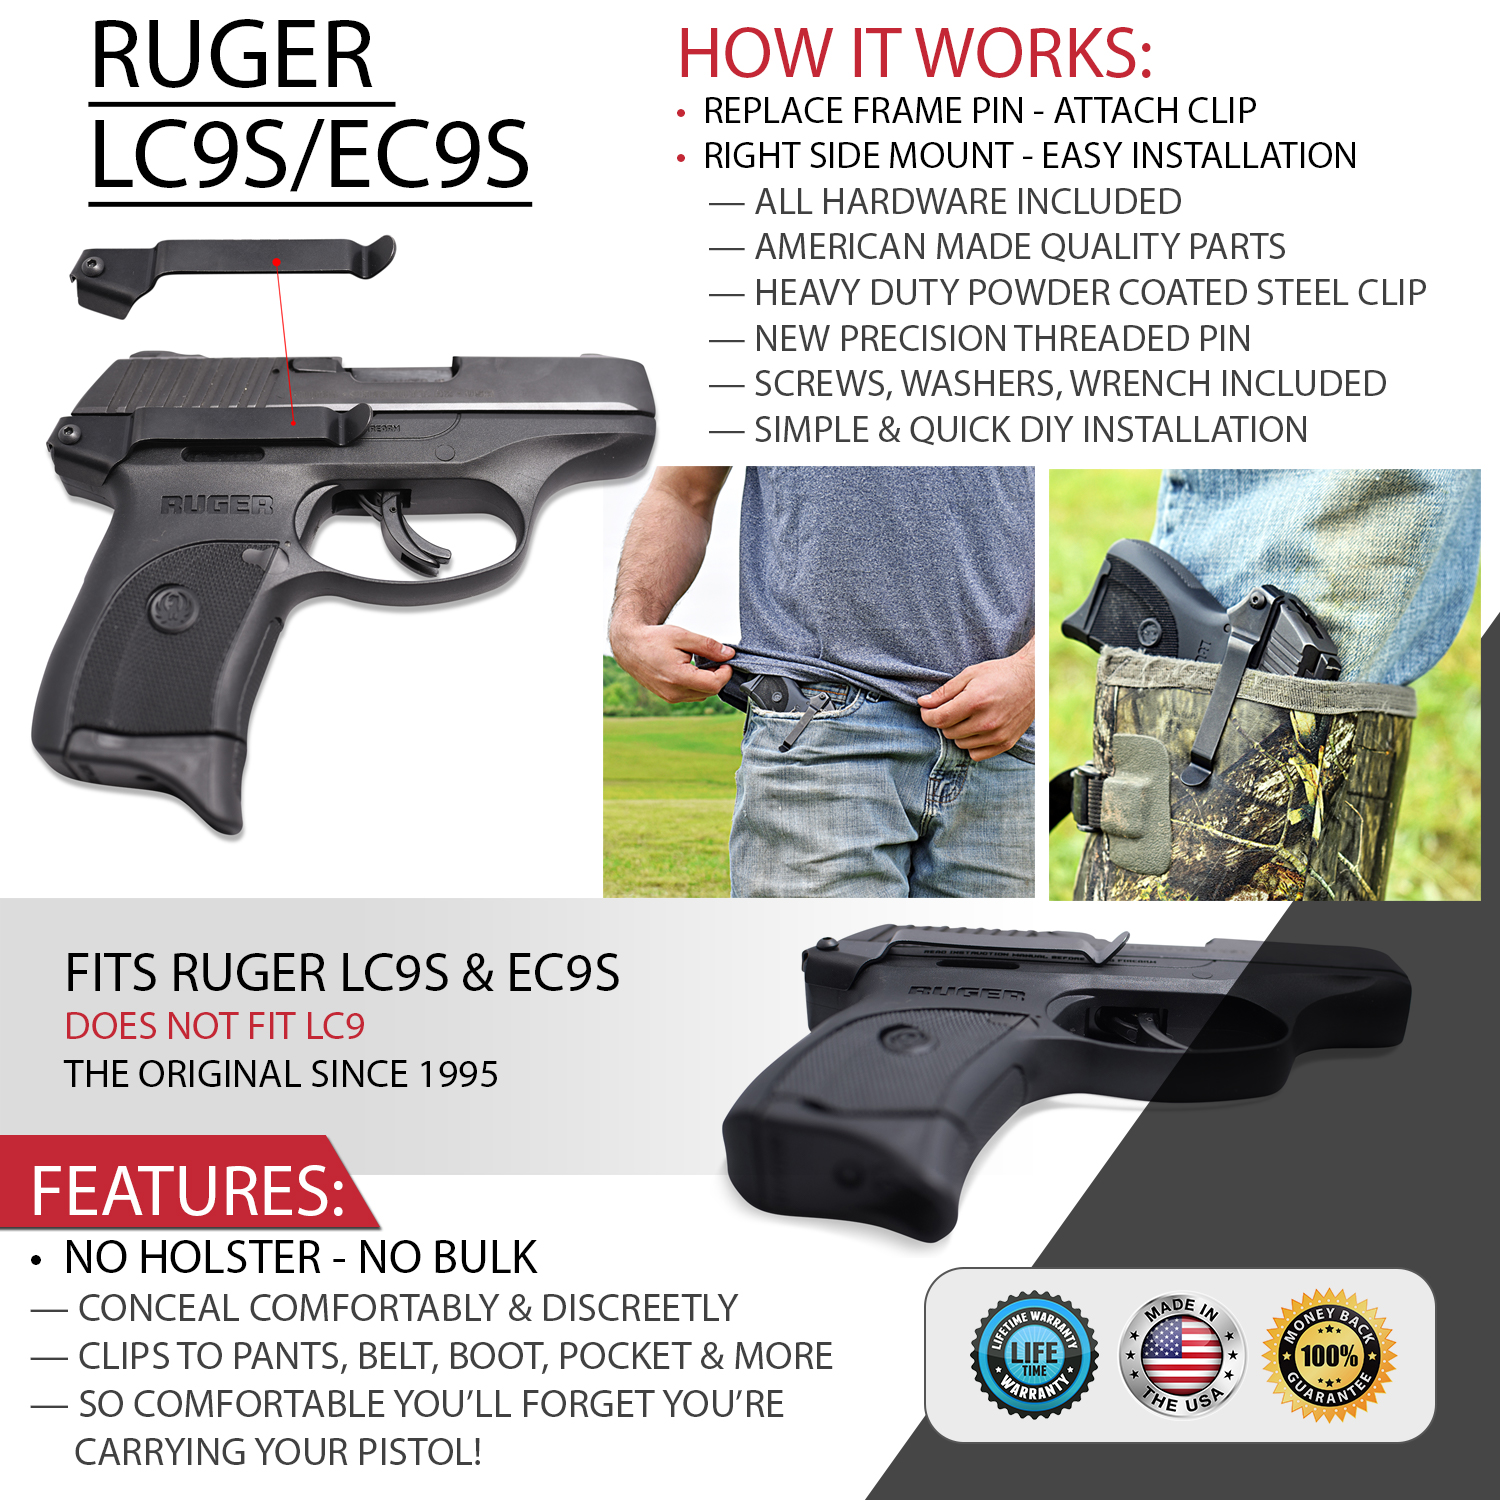 THE ULTIMATE SMALL OF THE BACK LEATHER GUN HOLSTER FOR RUGER LC9 & LC9s 